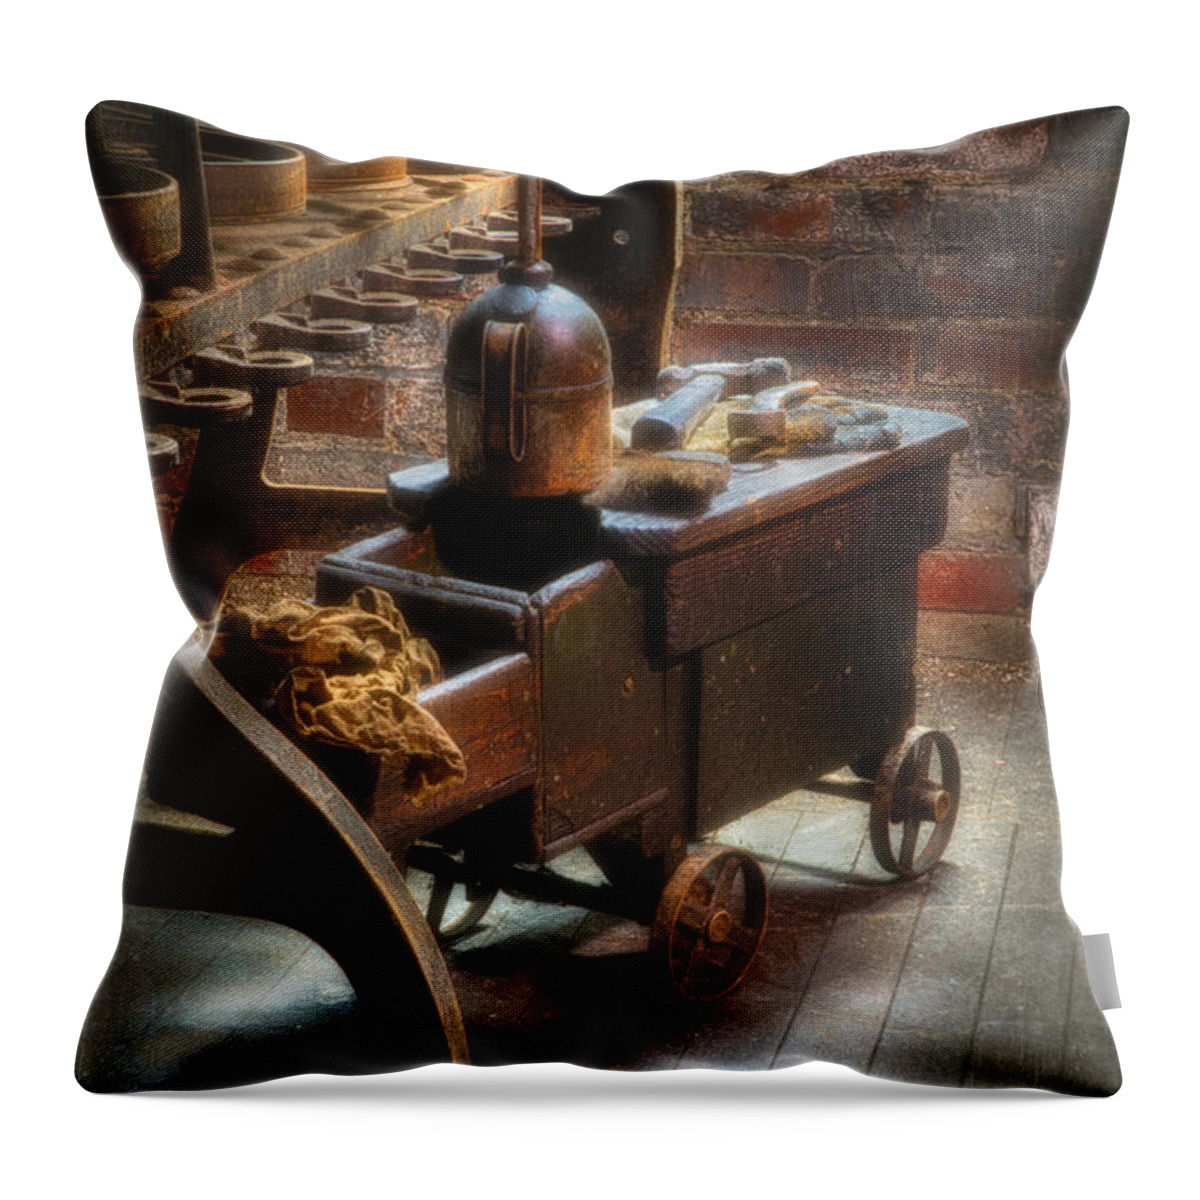 Abandon Factory Throw Pillow featuring the photograph Tool Cart by Jerry Fornarotto